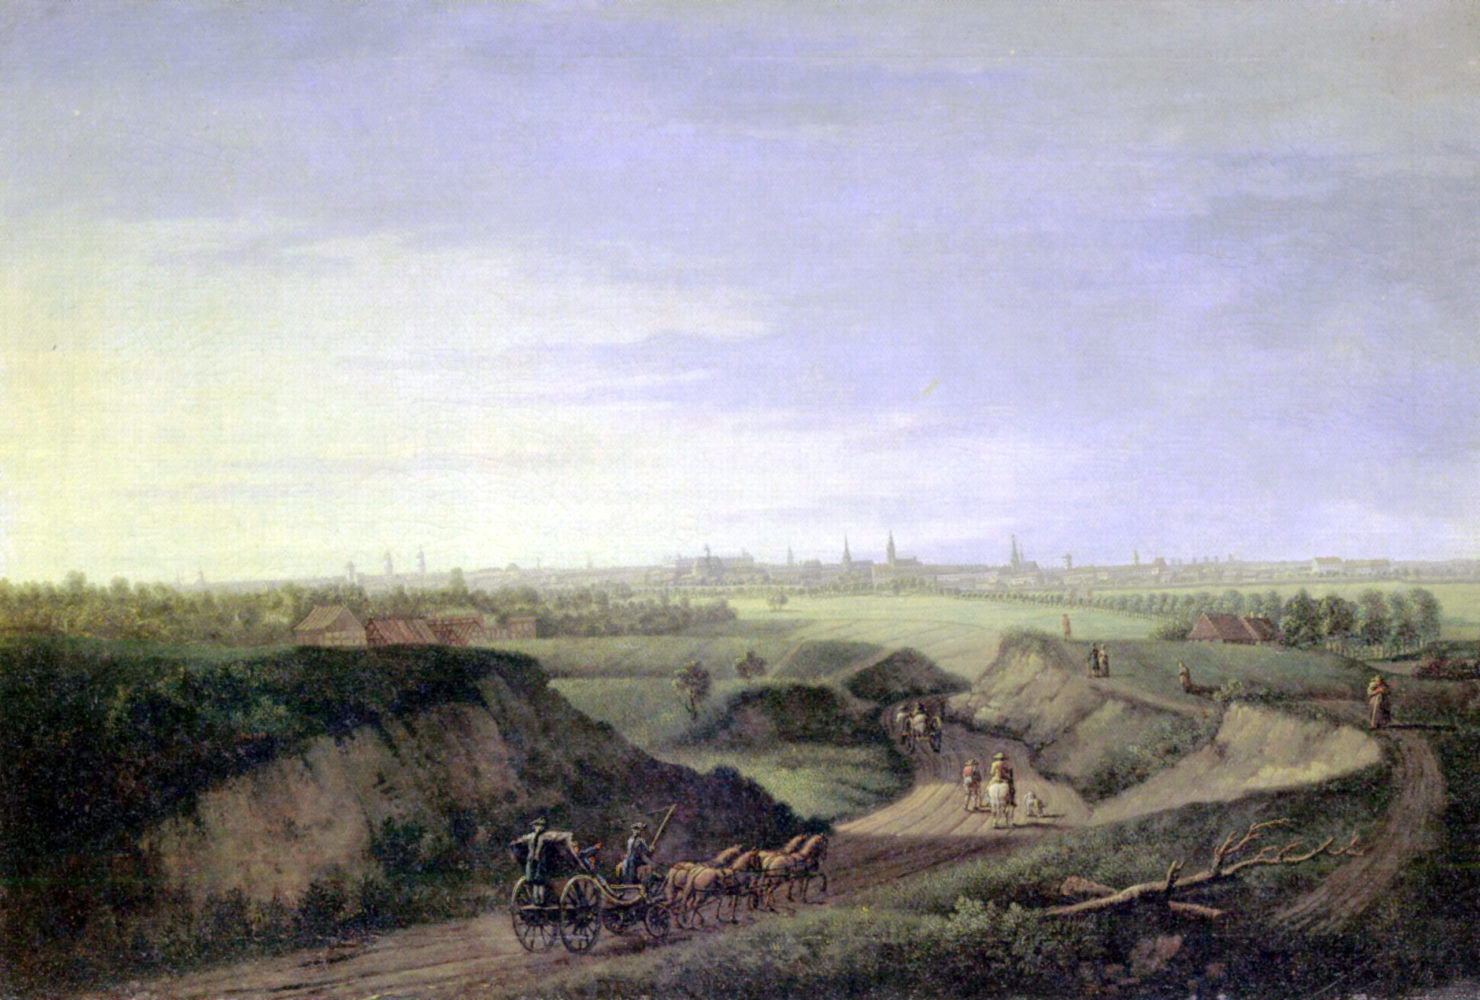 Johann Georg Rosenberg's painting of the Rollberge in Berlin. In the foreground, a coach pulled by four horses on a dirt road surrounded by rolling hills. The winding highway stretches into the distance. In the far distance is the 18th century city of Berlin.